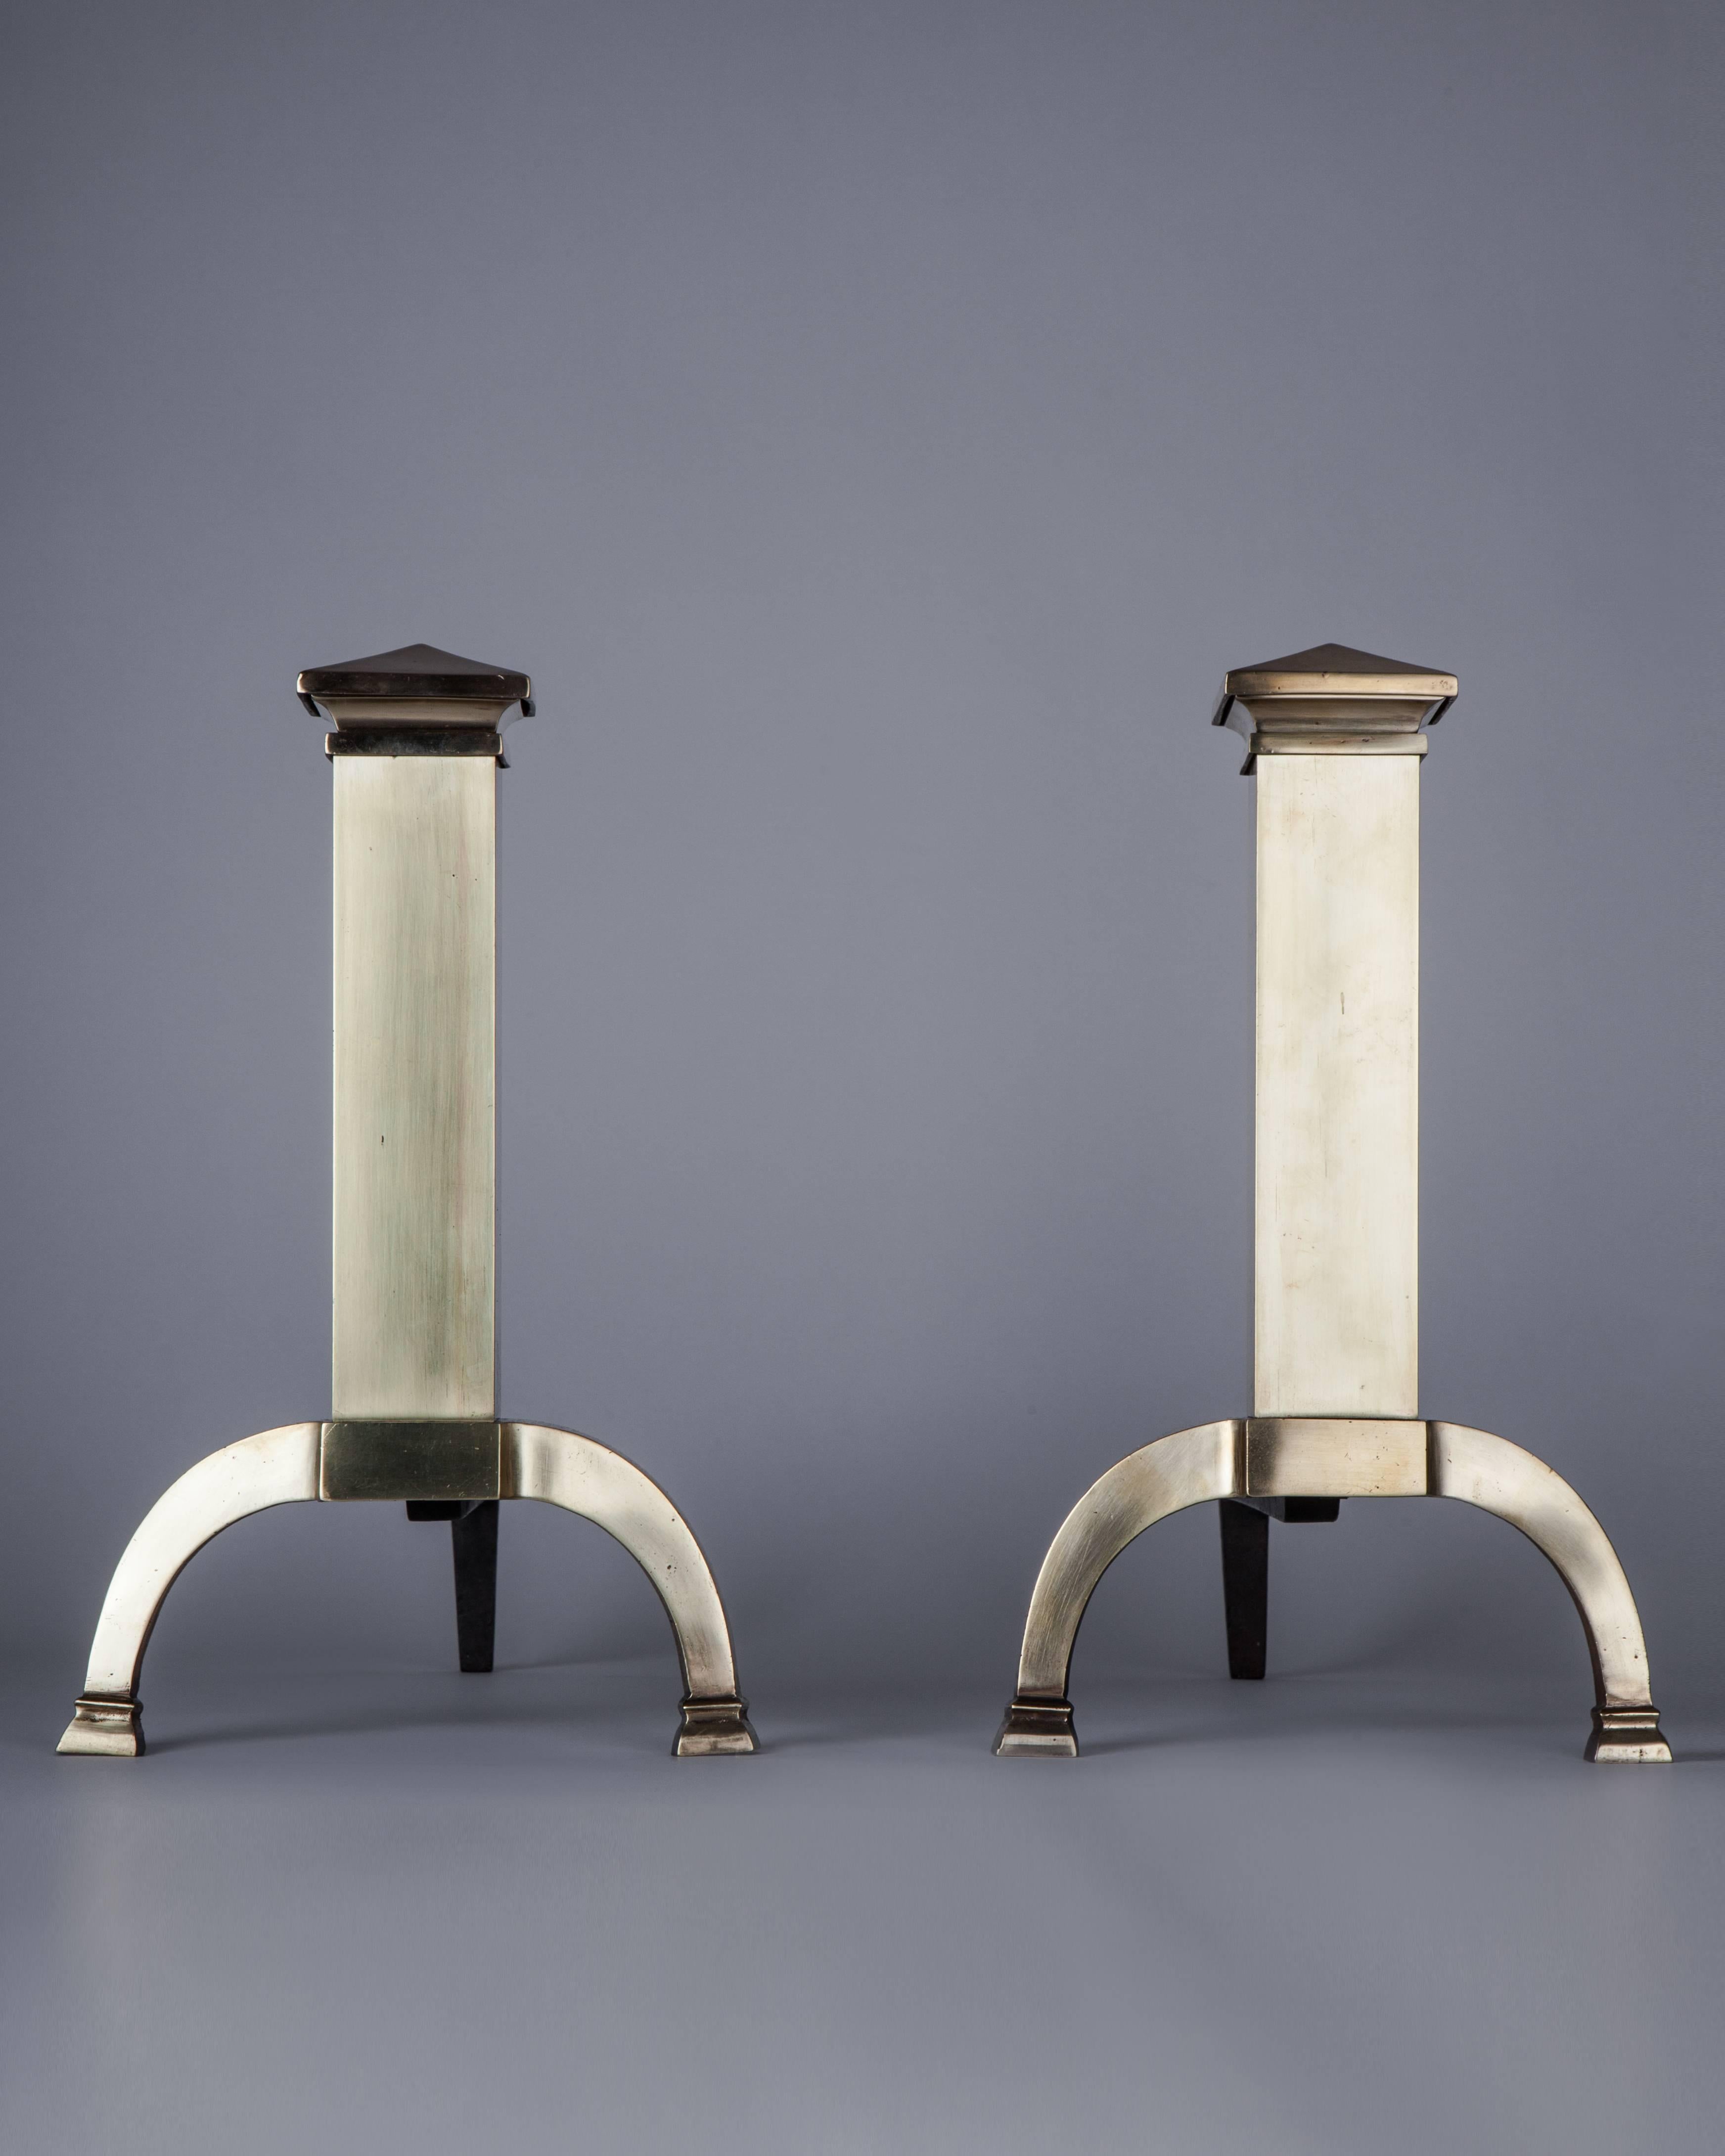 AFP0553
A pair of mission style andirons in their original satin brass finish.

Dimensions:
Overall: 14-1/2